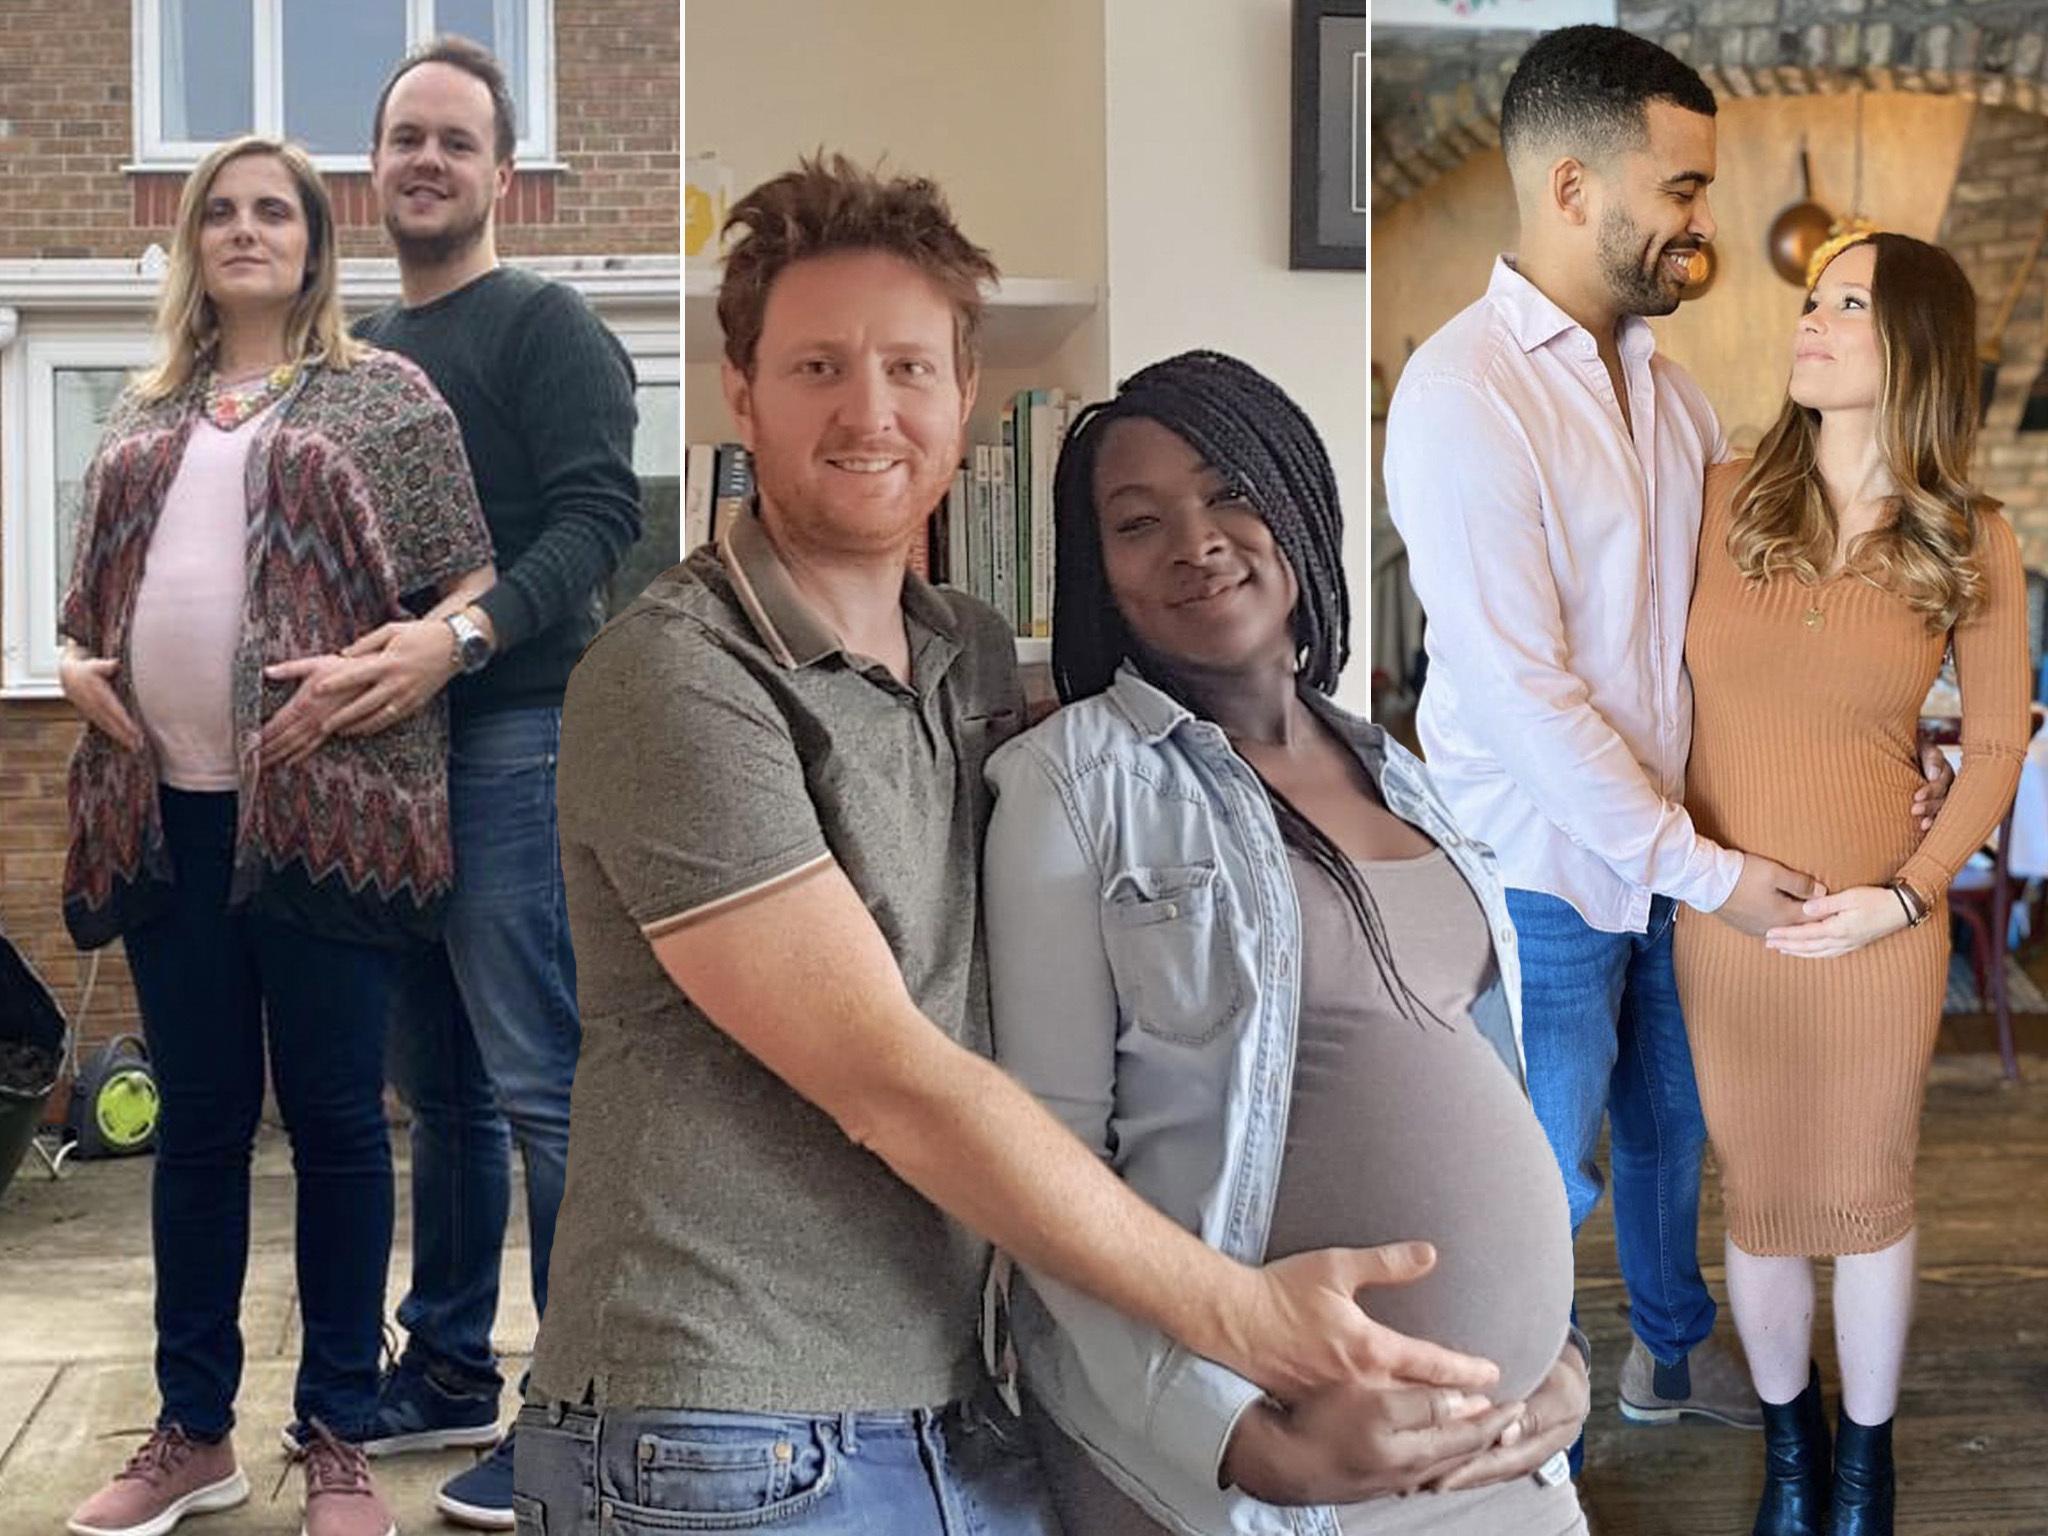 Baby steps: we spoke to three couples about the challenge they’re facing